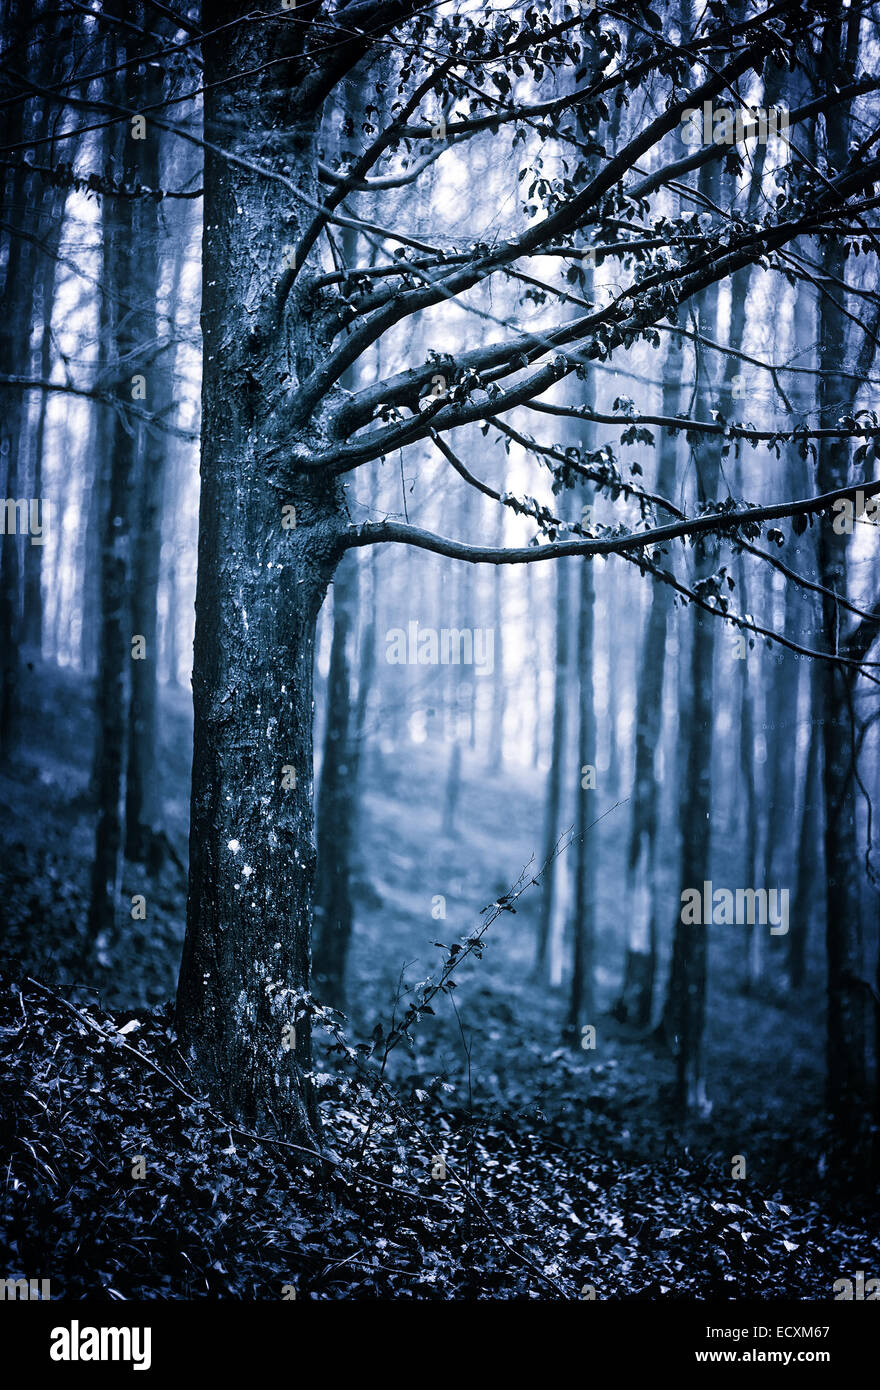 Moody landscape with scary forest at night Stock Photo - Alamy